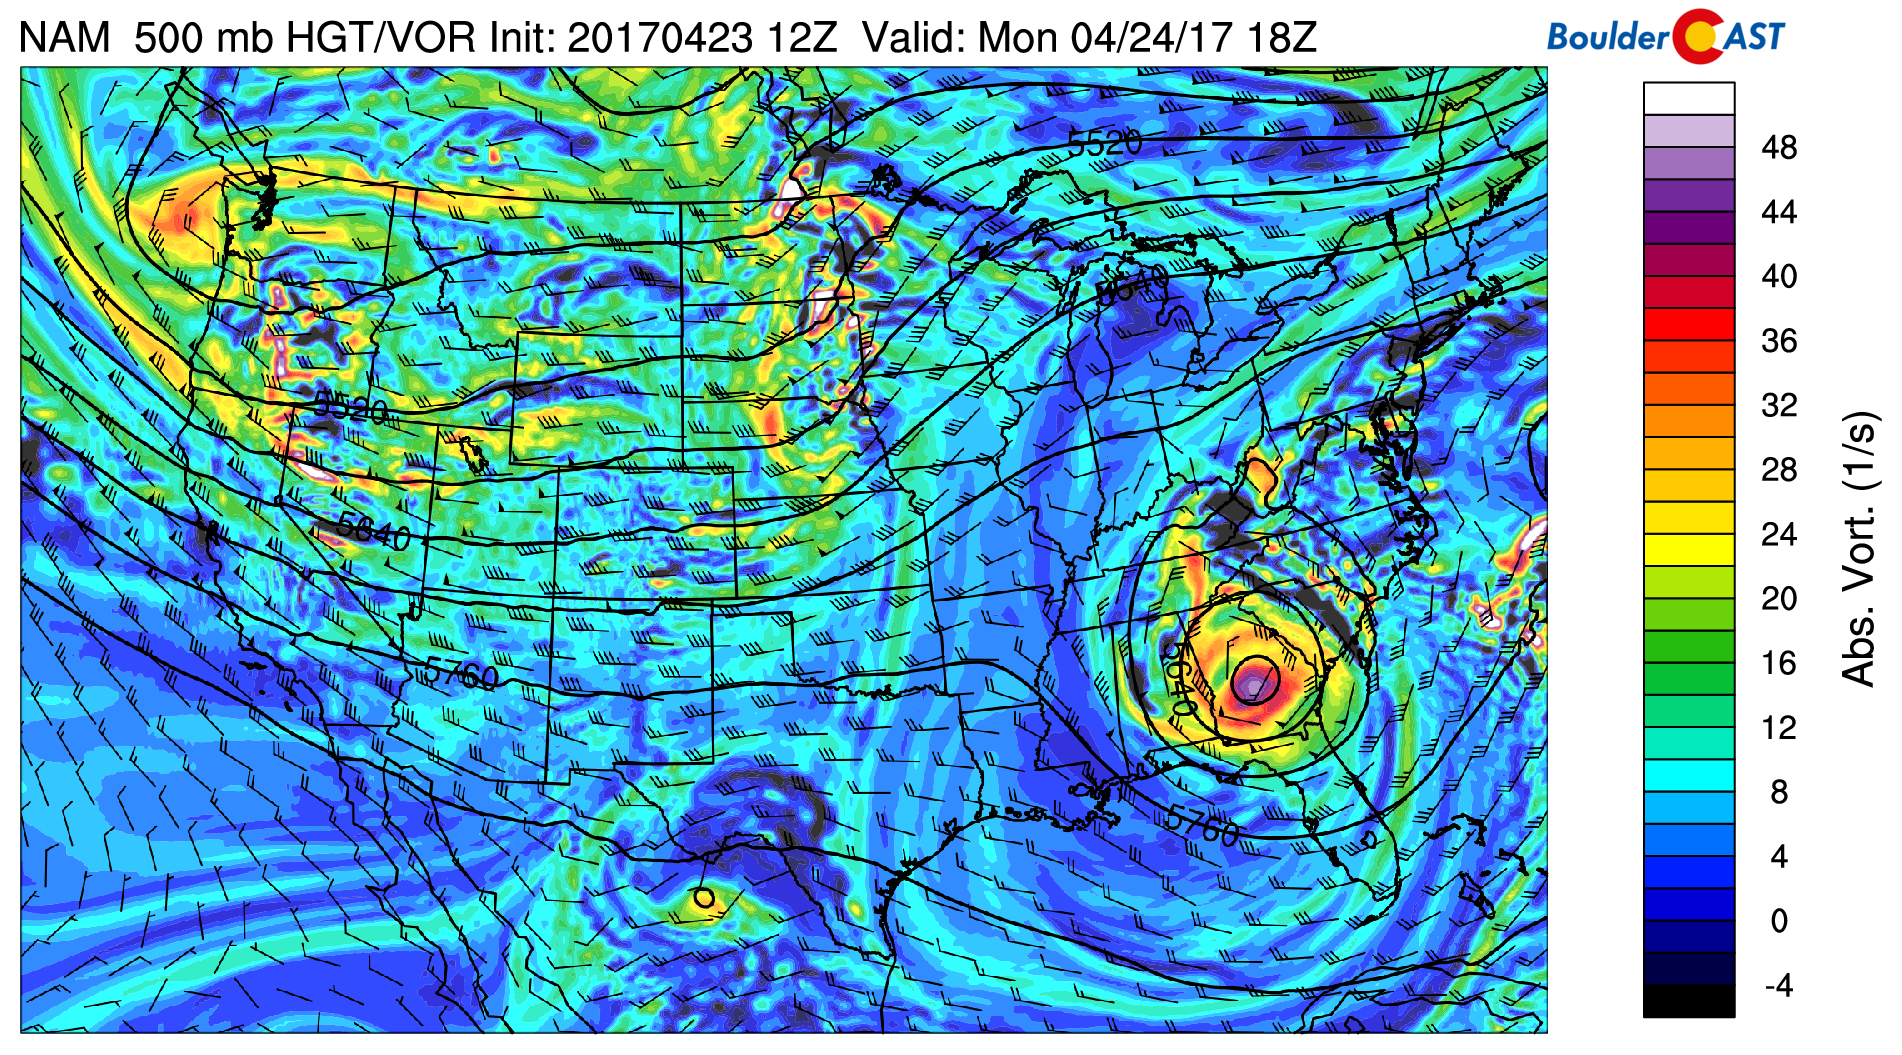 NAM 500 mb absolute vorticity and height pattern today